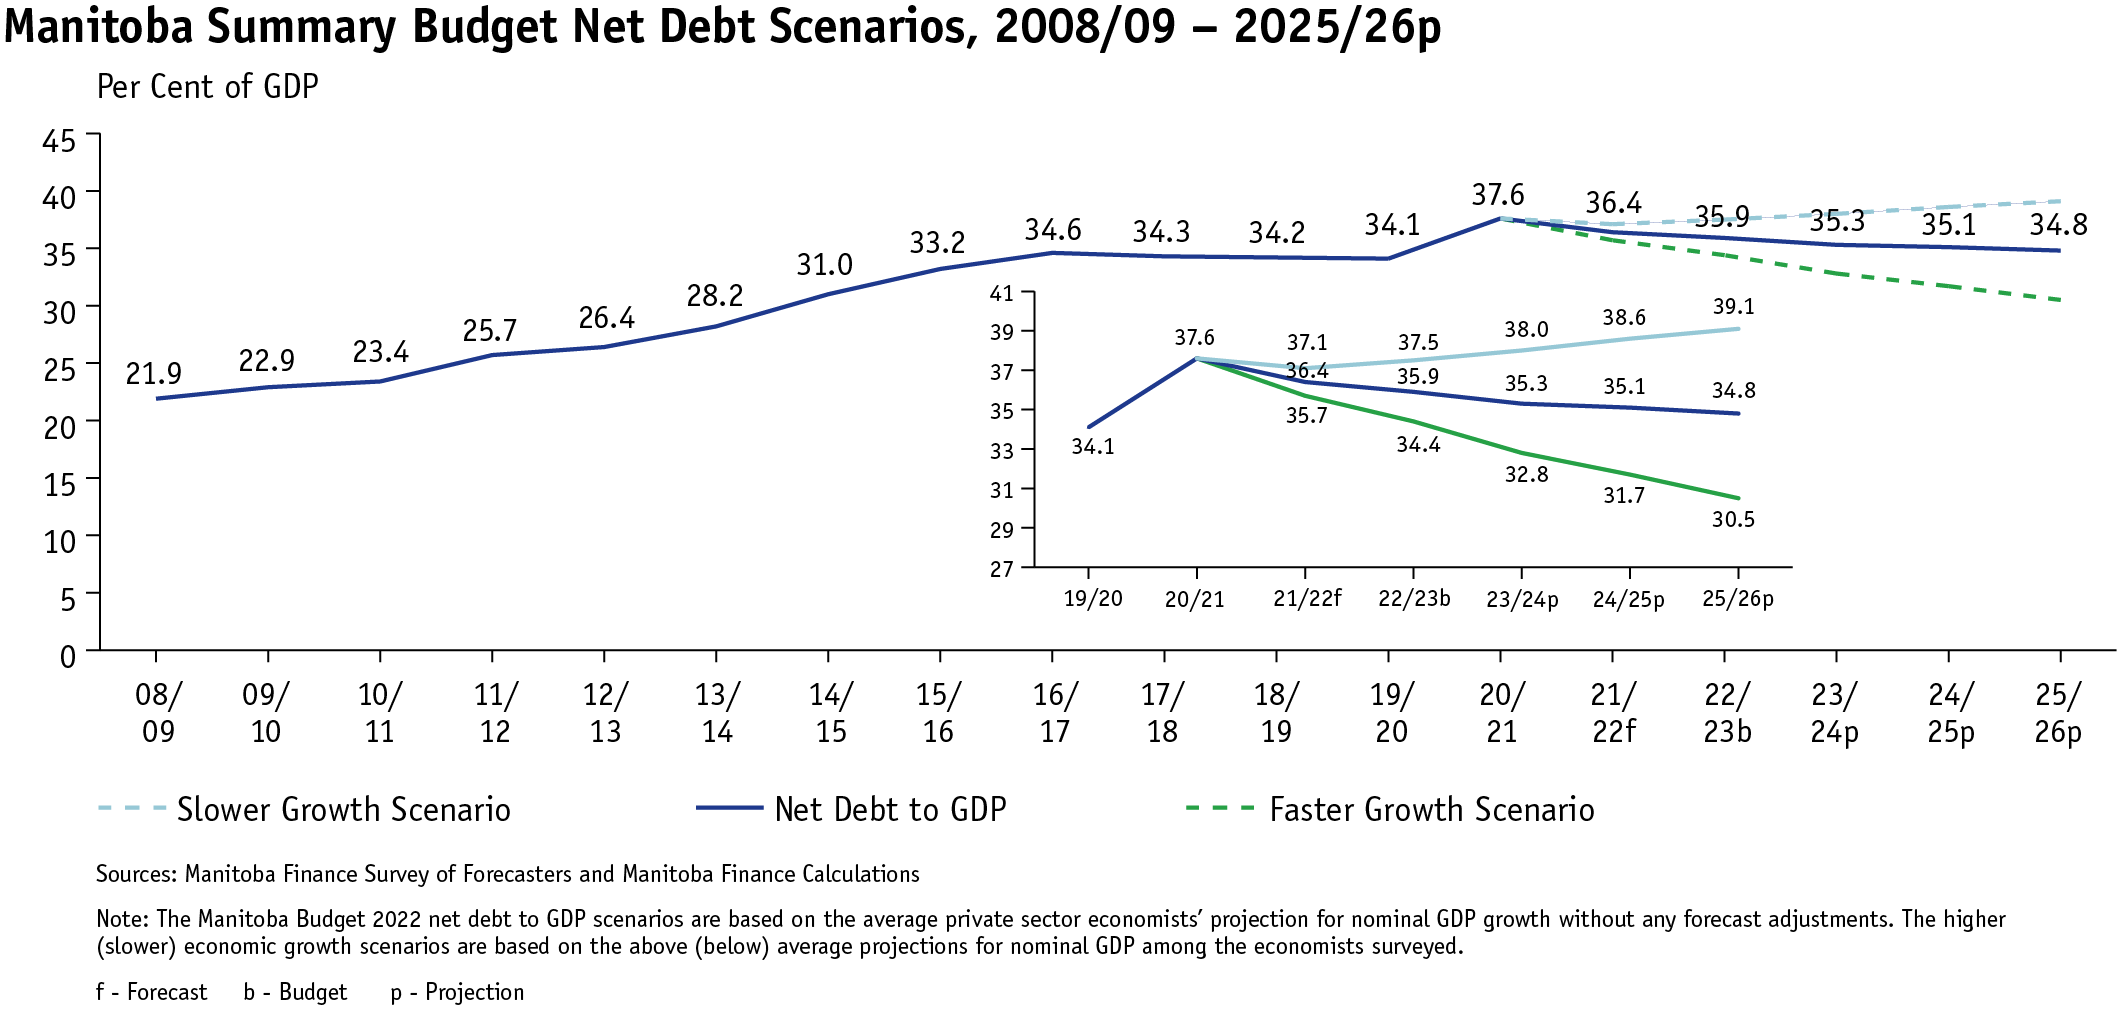 line graph and bar graph showing total expenditure as a percentage of GDP for Manitoba and provincial weighted average from 2013/14 to 2022/23